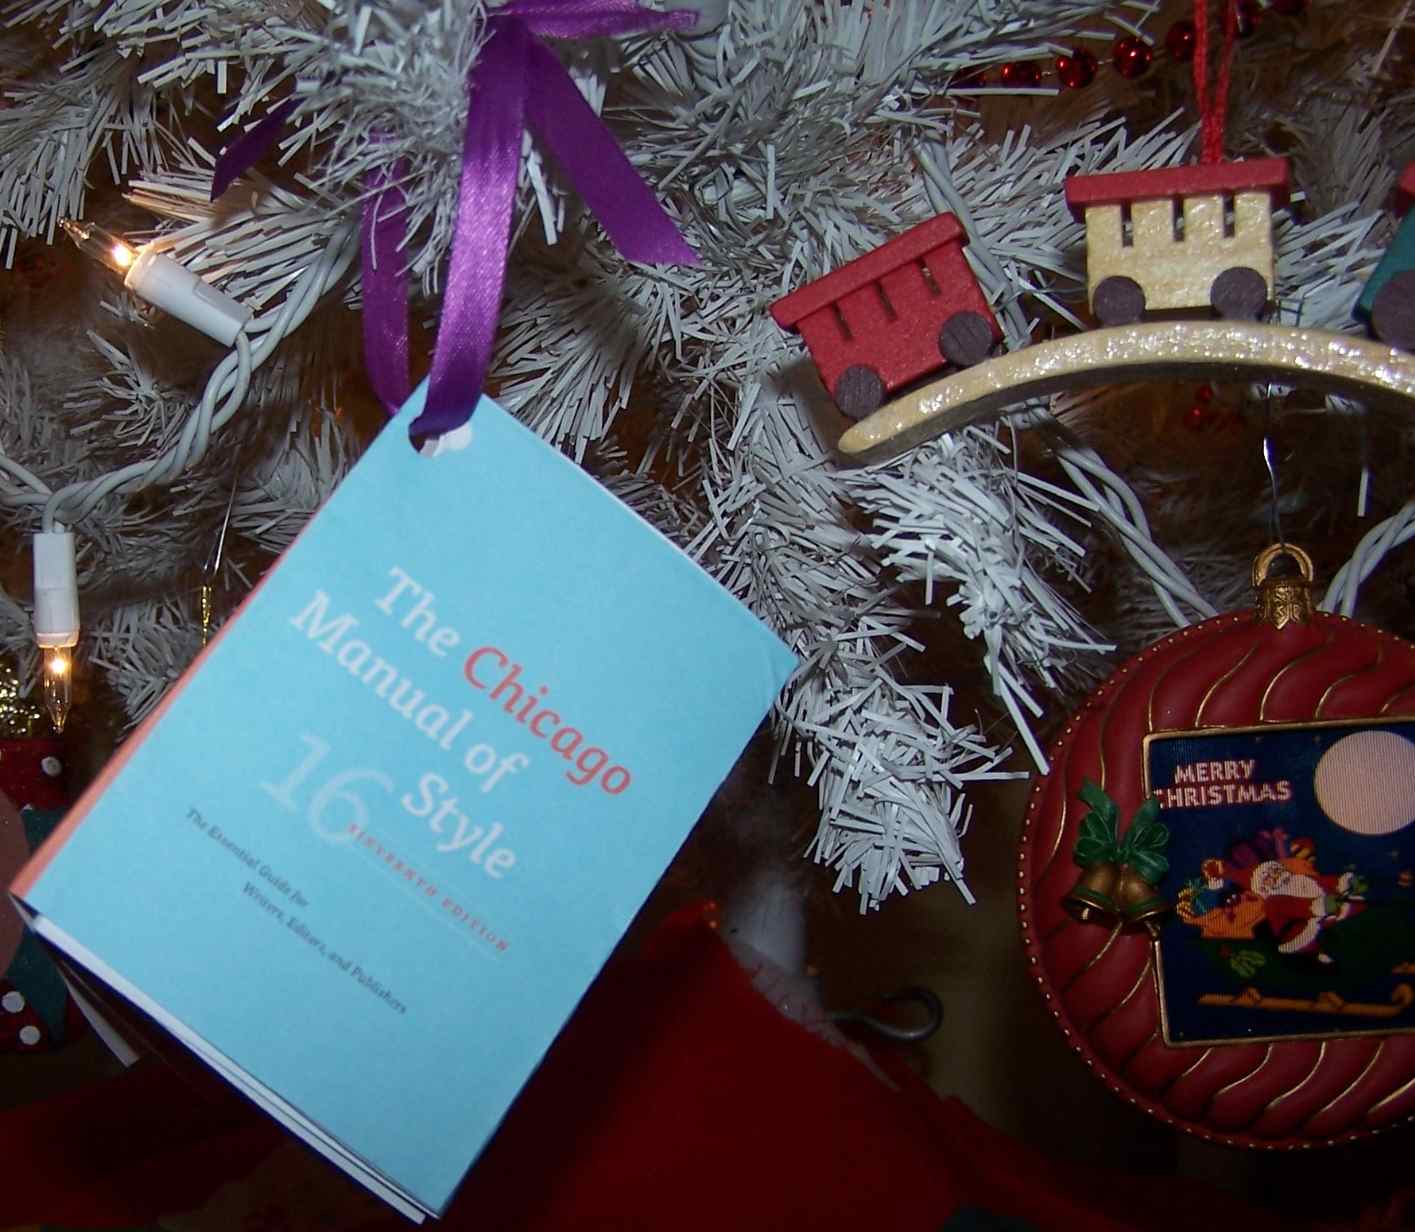 Chicago Manual of Style, Minibook tree decoration